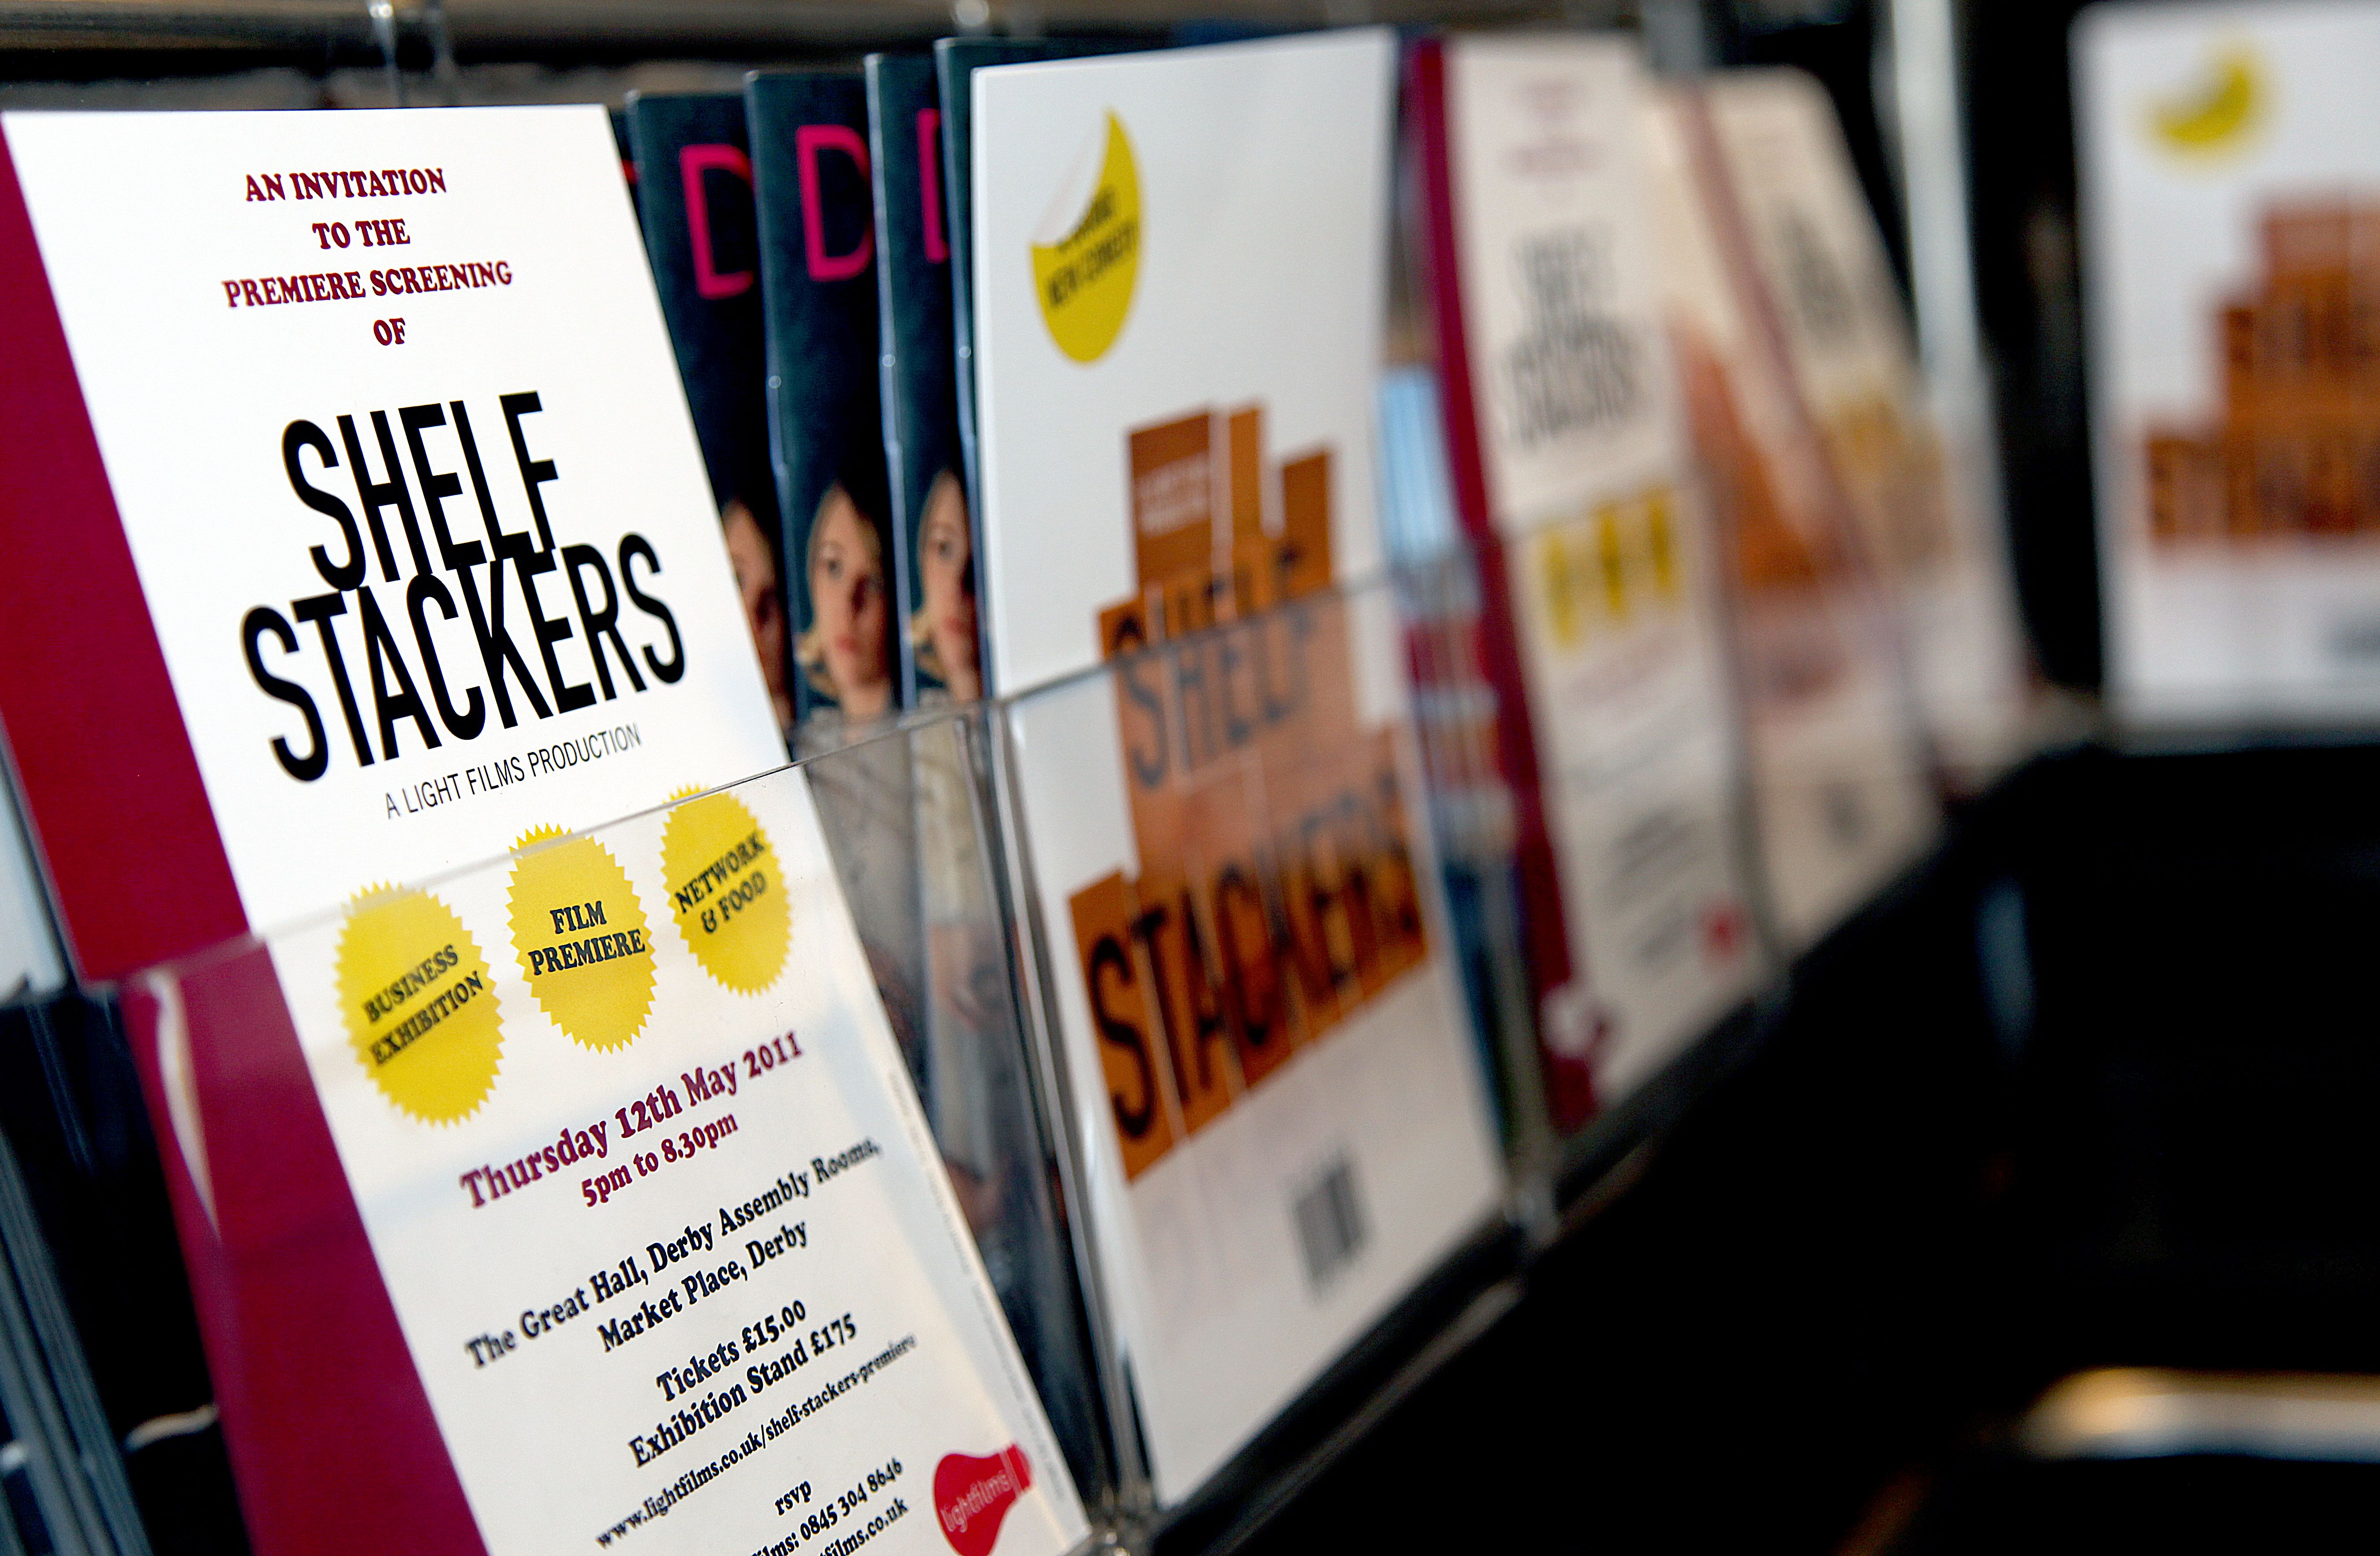 Publicity and marketing for Shelf Stackers, a Light Films independent film released and premiered in 2011. Publicity and event management by Chrissa Maund for Light Films.